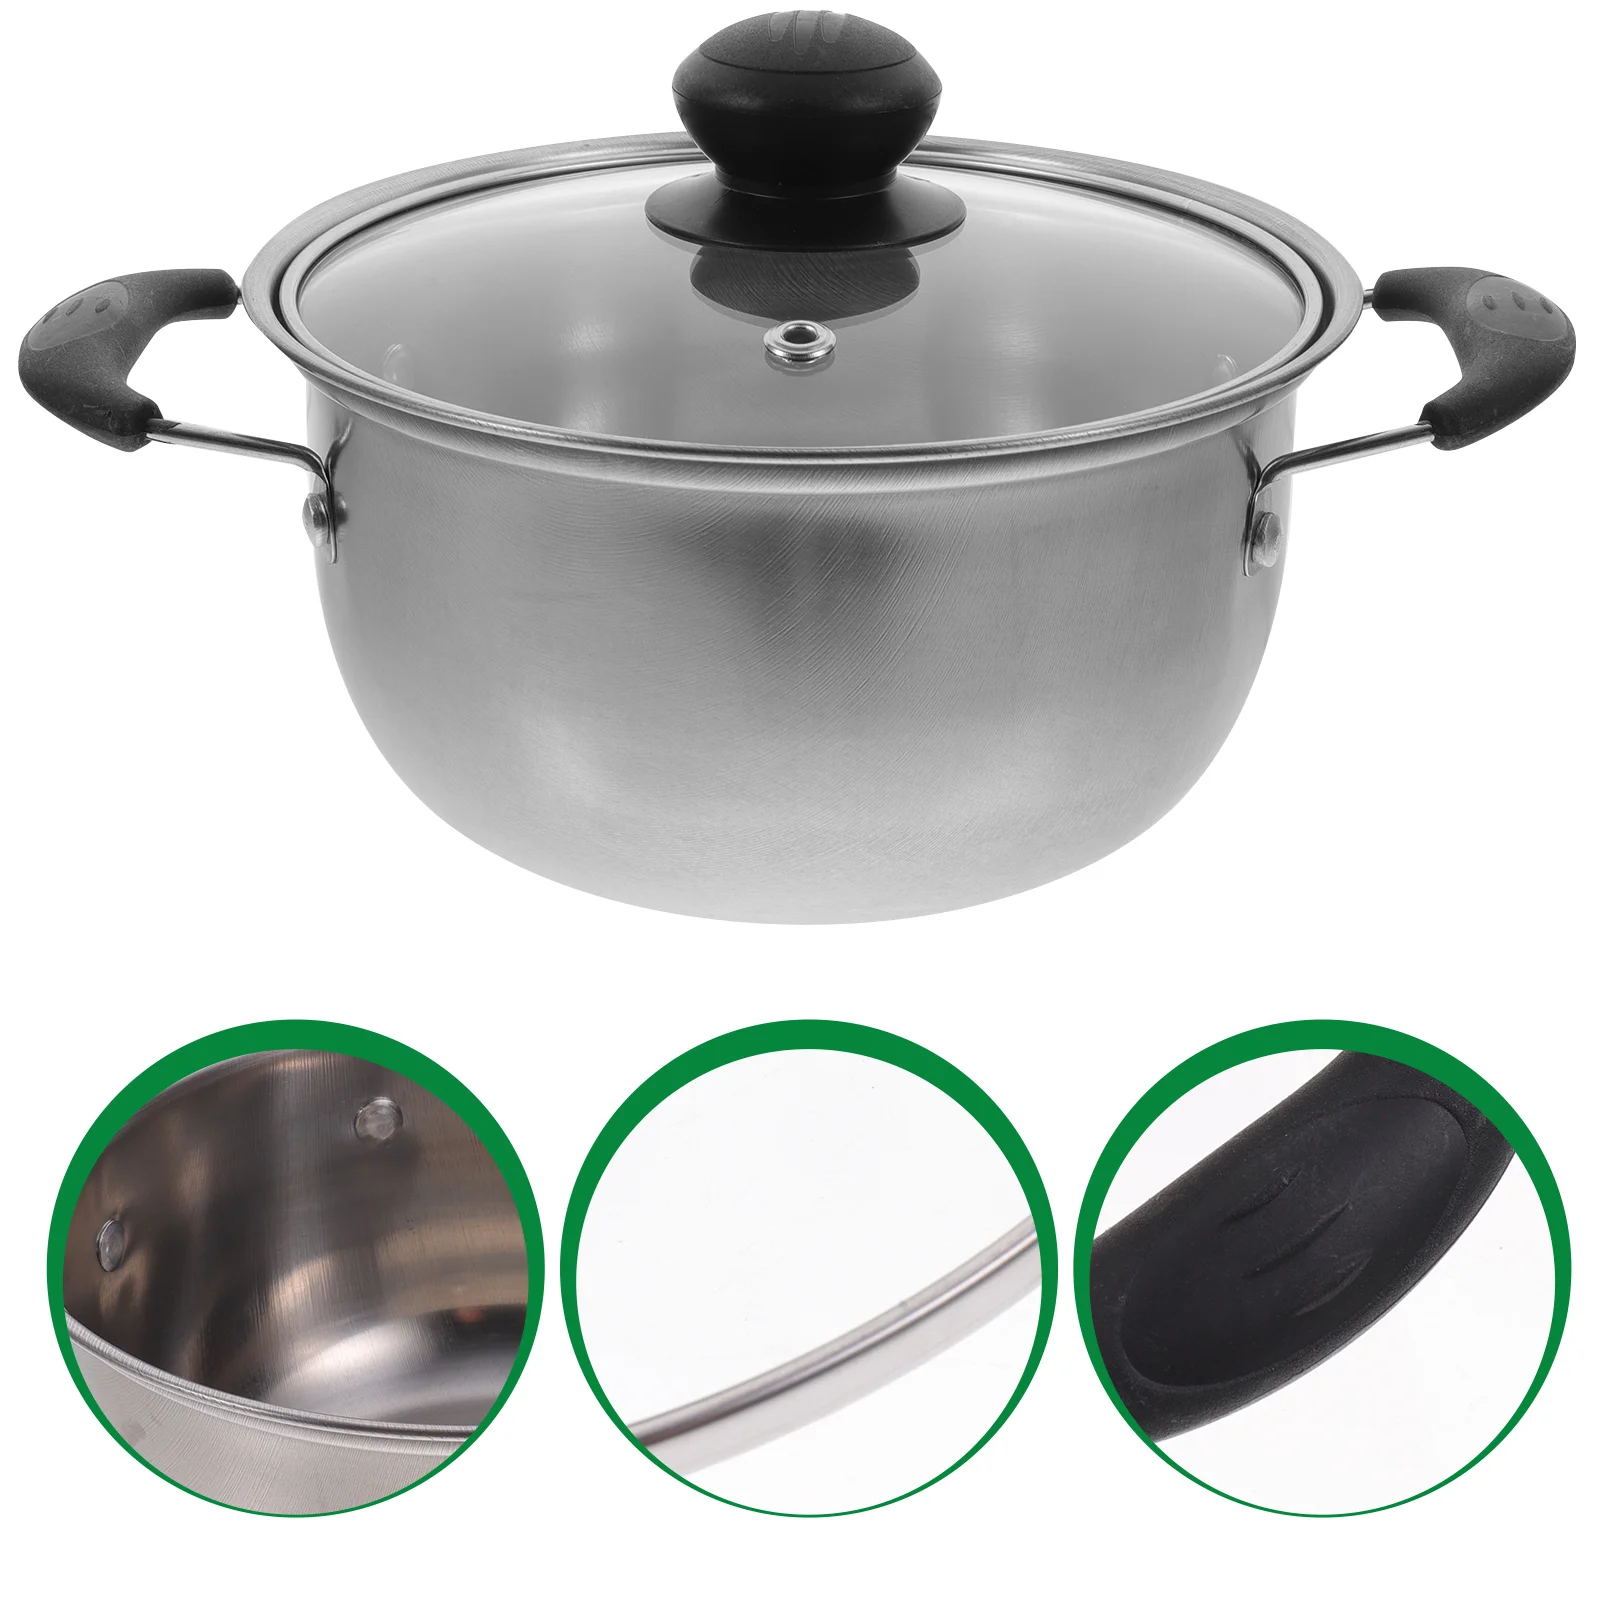 

Pot Soup Cooking Stainless Steel Stock Lid Pan Pasta Kitchen Milk Cookware Saucepan Noodle Stew Noodles Stockpot Boiling Hot